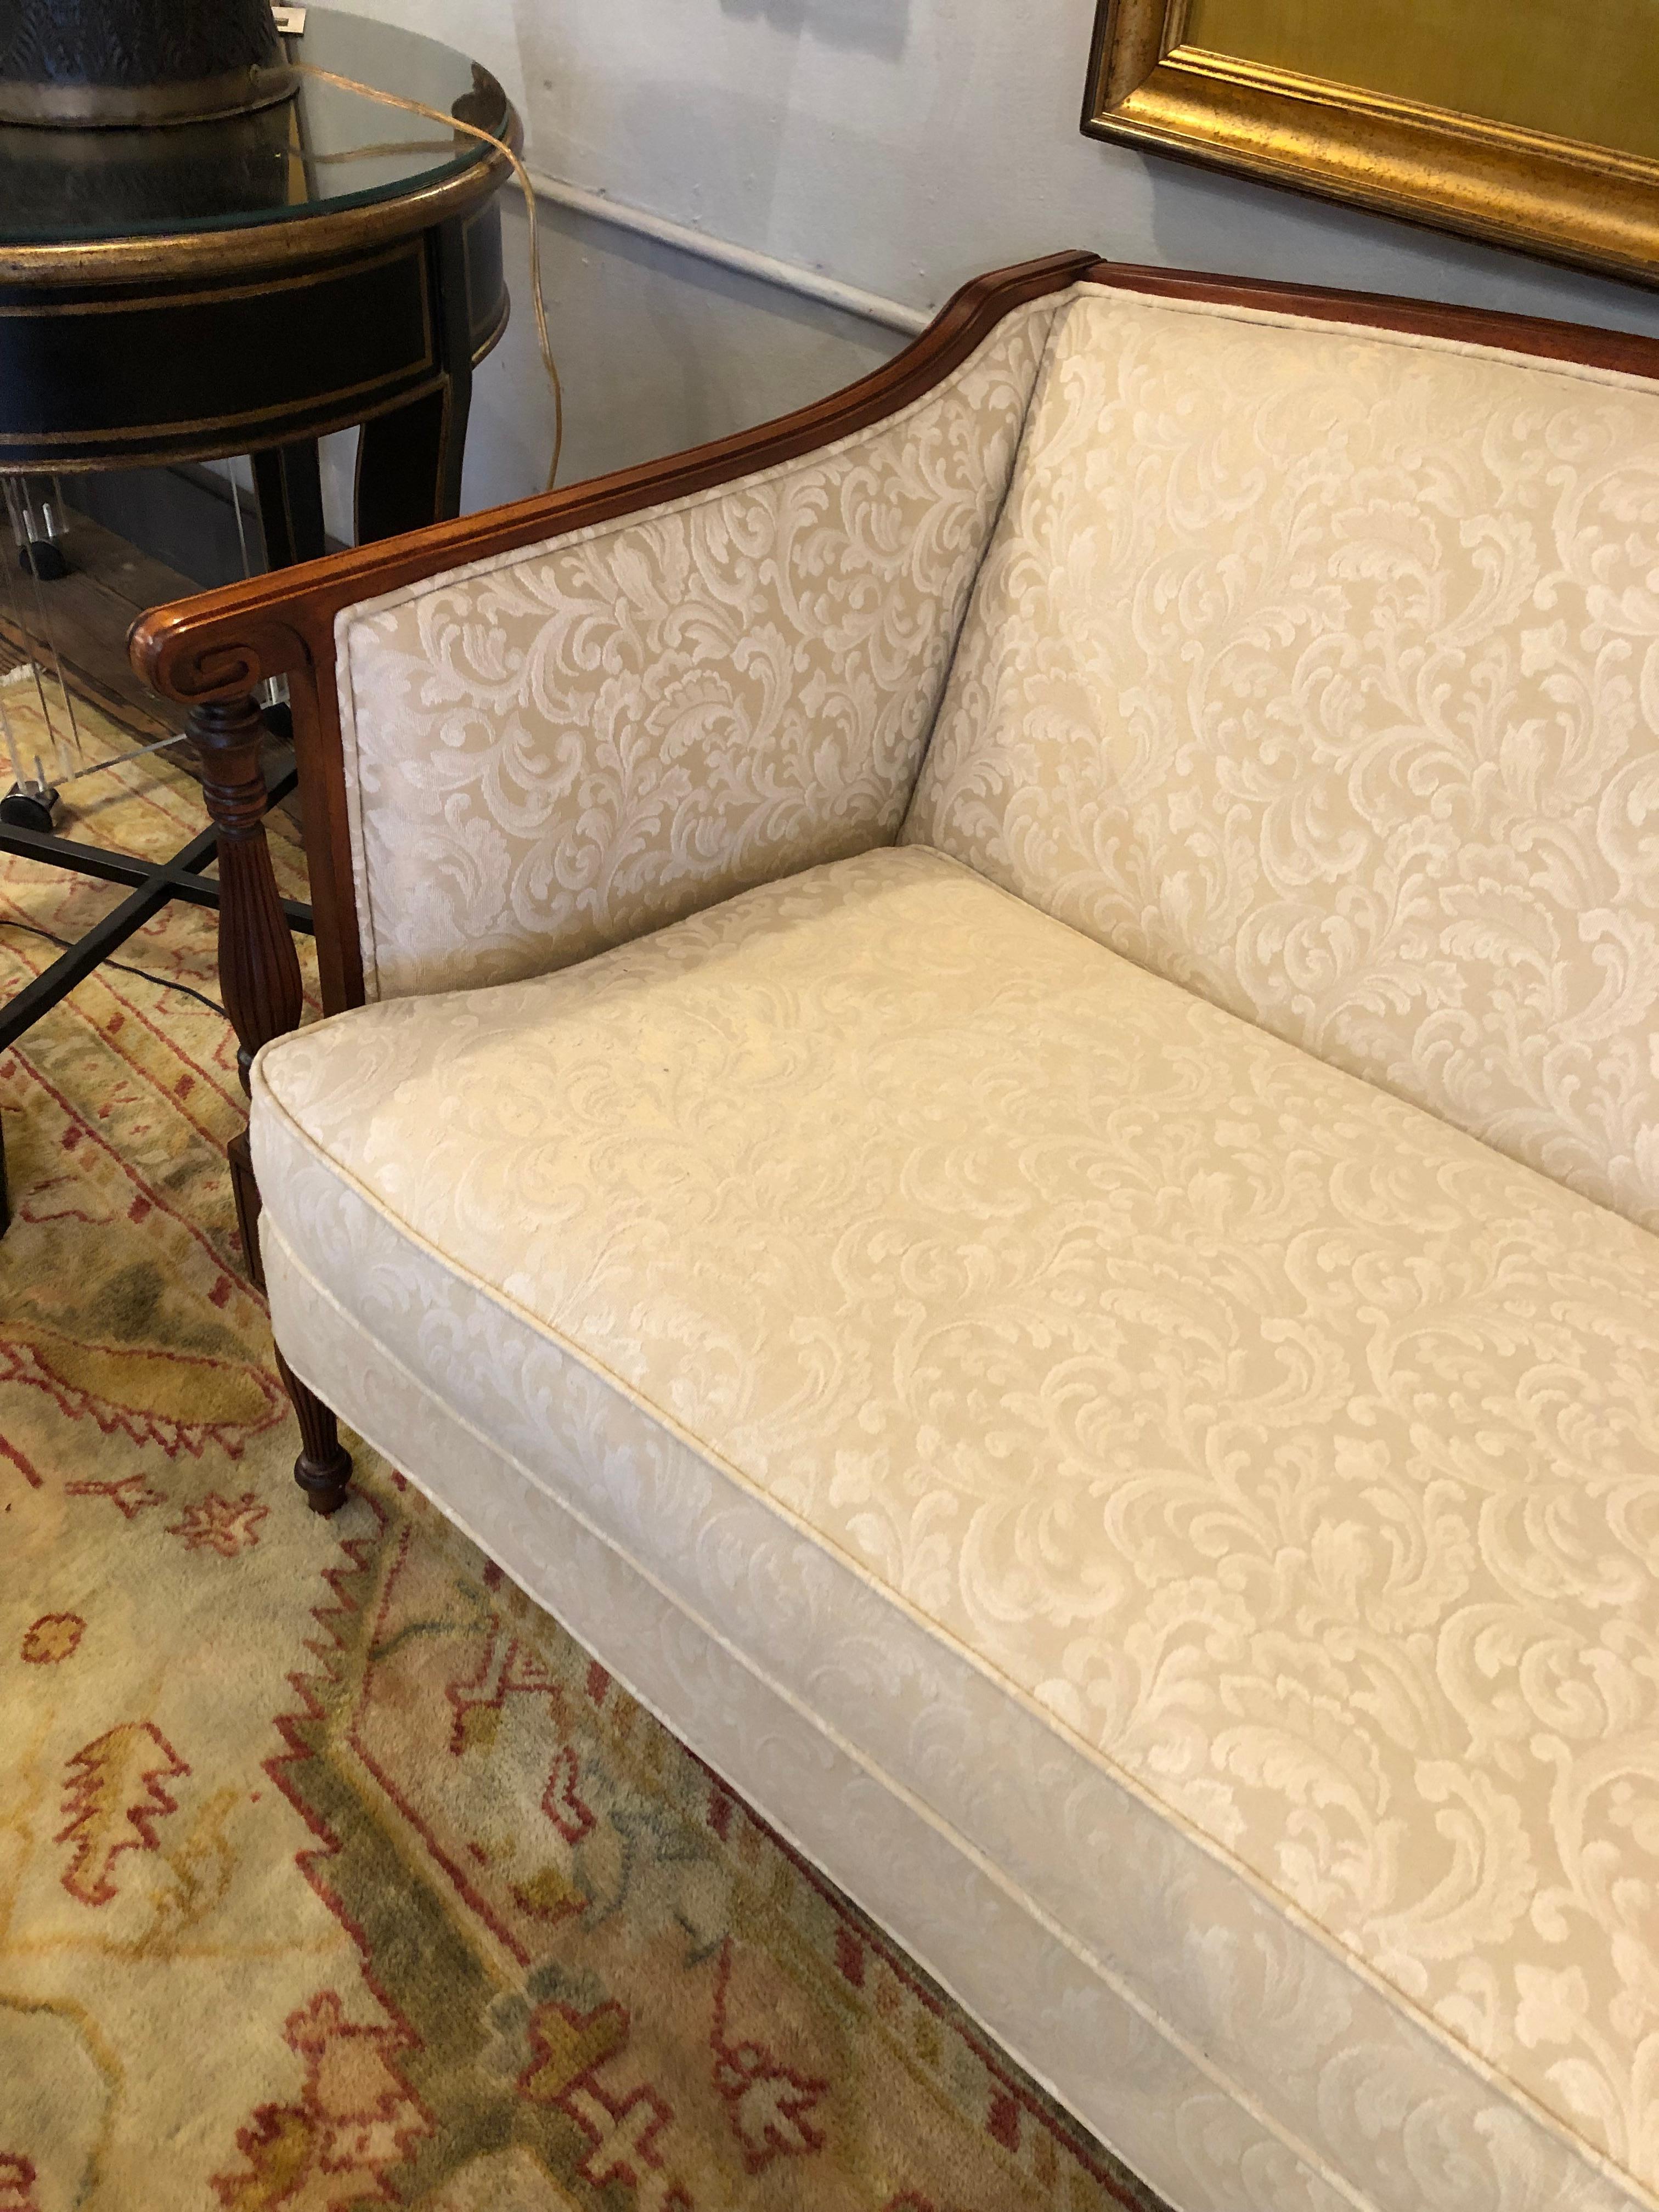 Classically elegant carved mahogany Sheraton style loveseat having sophisticated clean lines, lovely carved arm rests and reeded legs. Upholstery is cream damask. Pretty front and back, finished all the way around.
Measures: arm height 27.5
seat